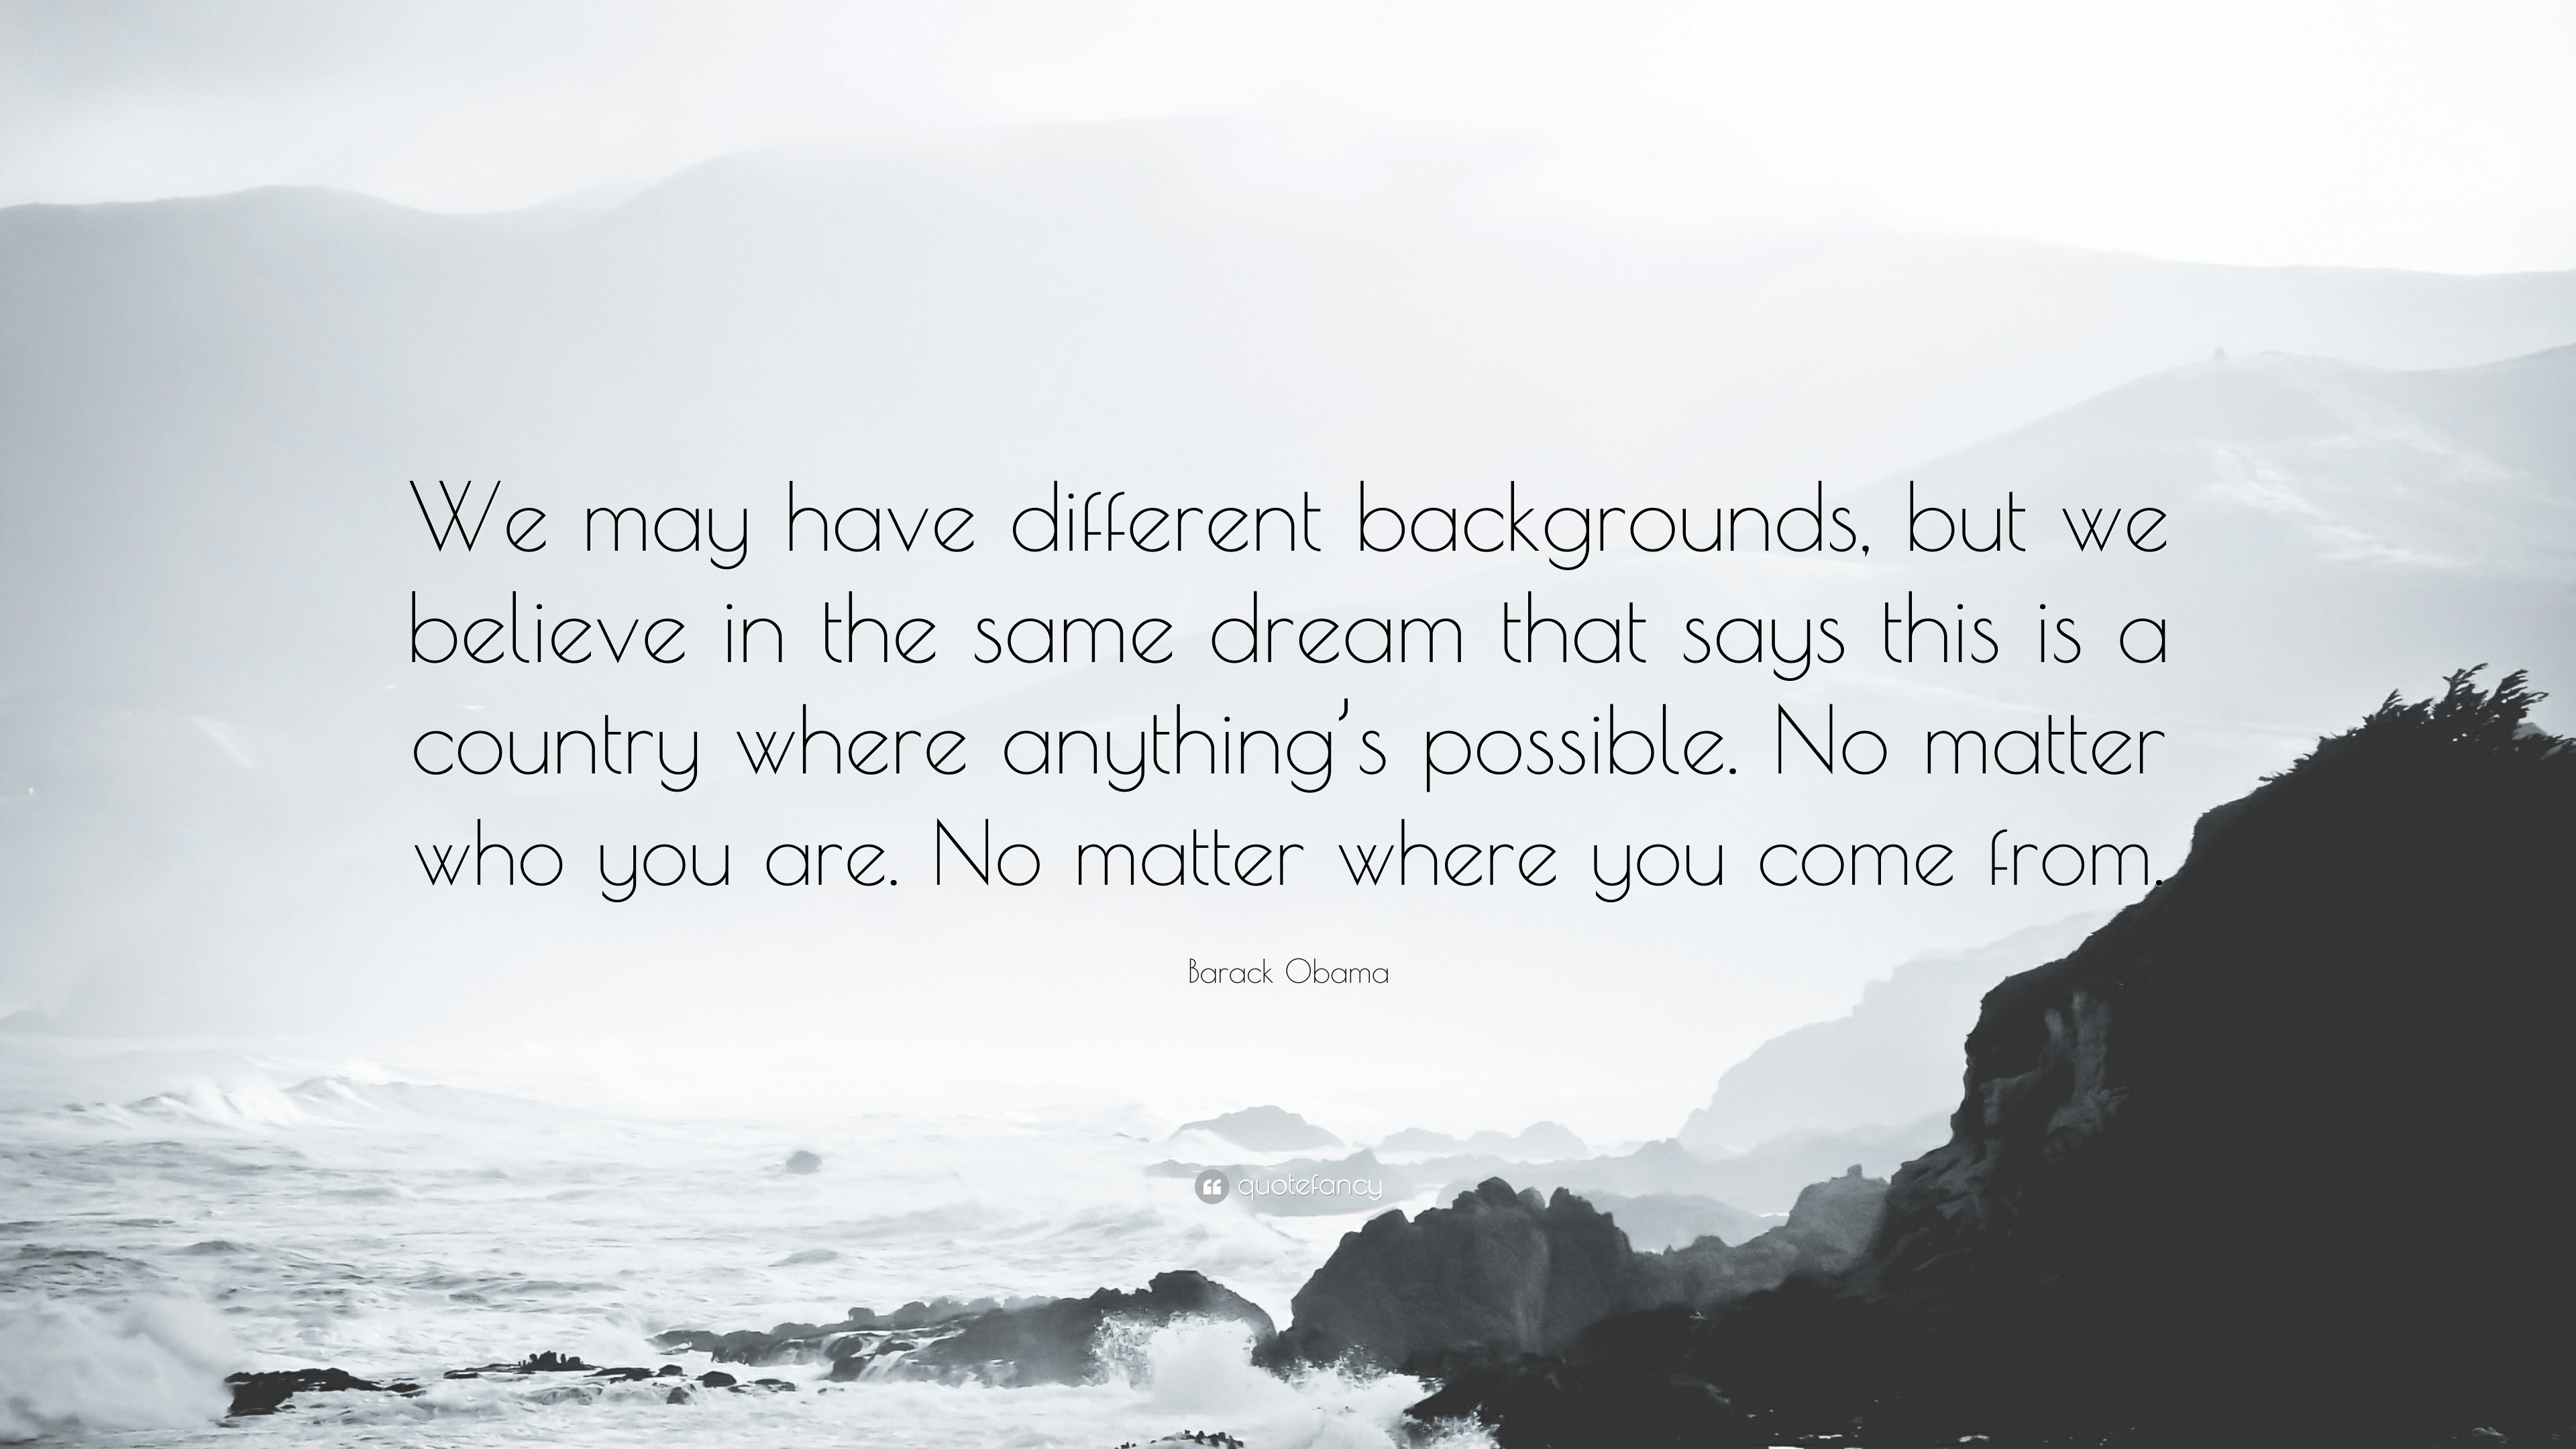 3840x2160 Barack Obama Quote: “We may have different backgrounds, but we believe in  the